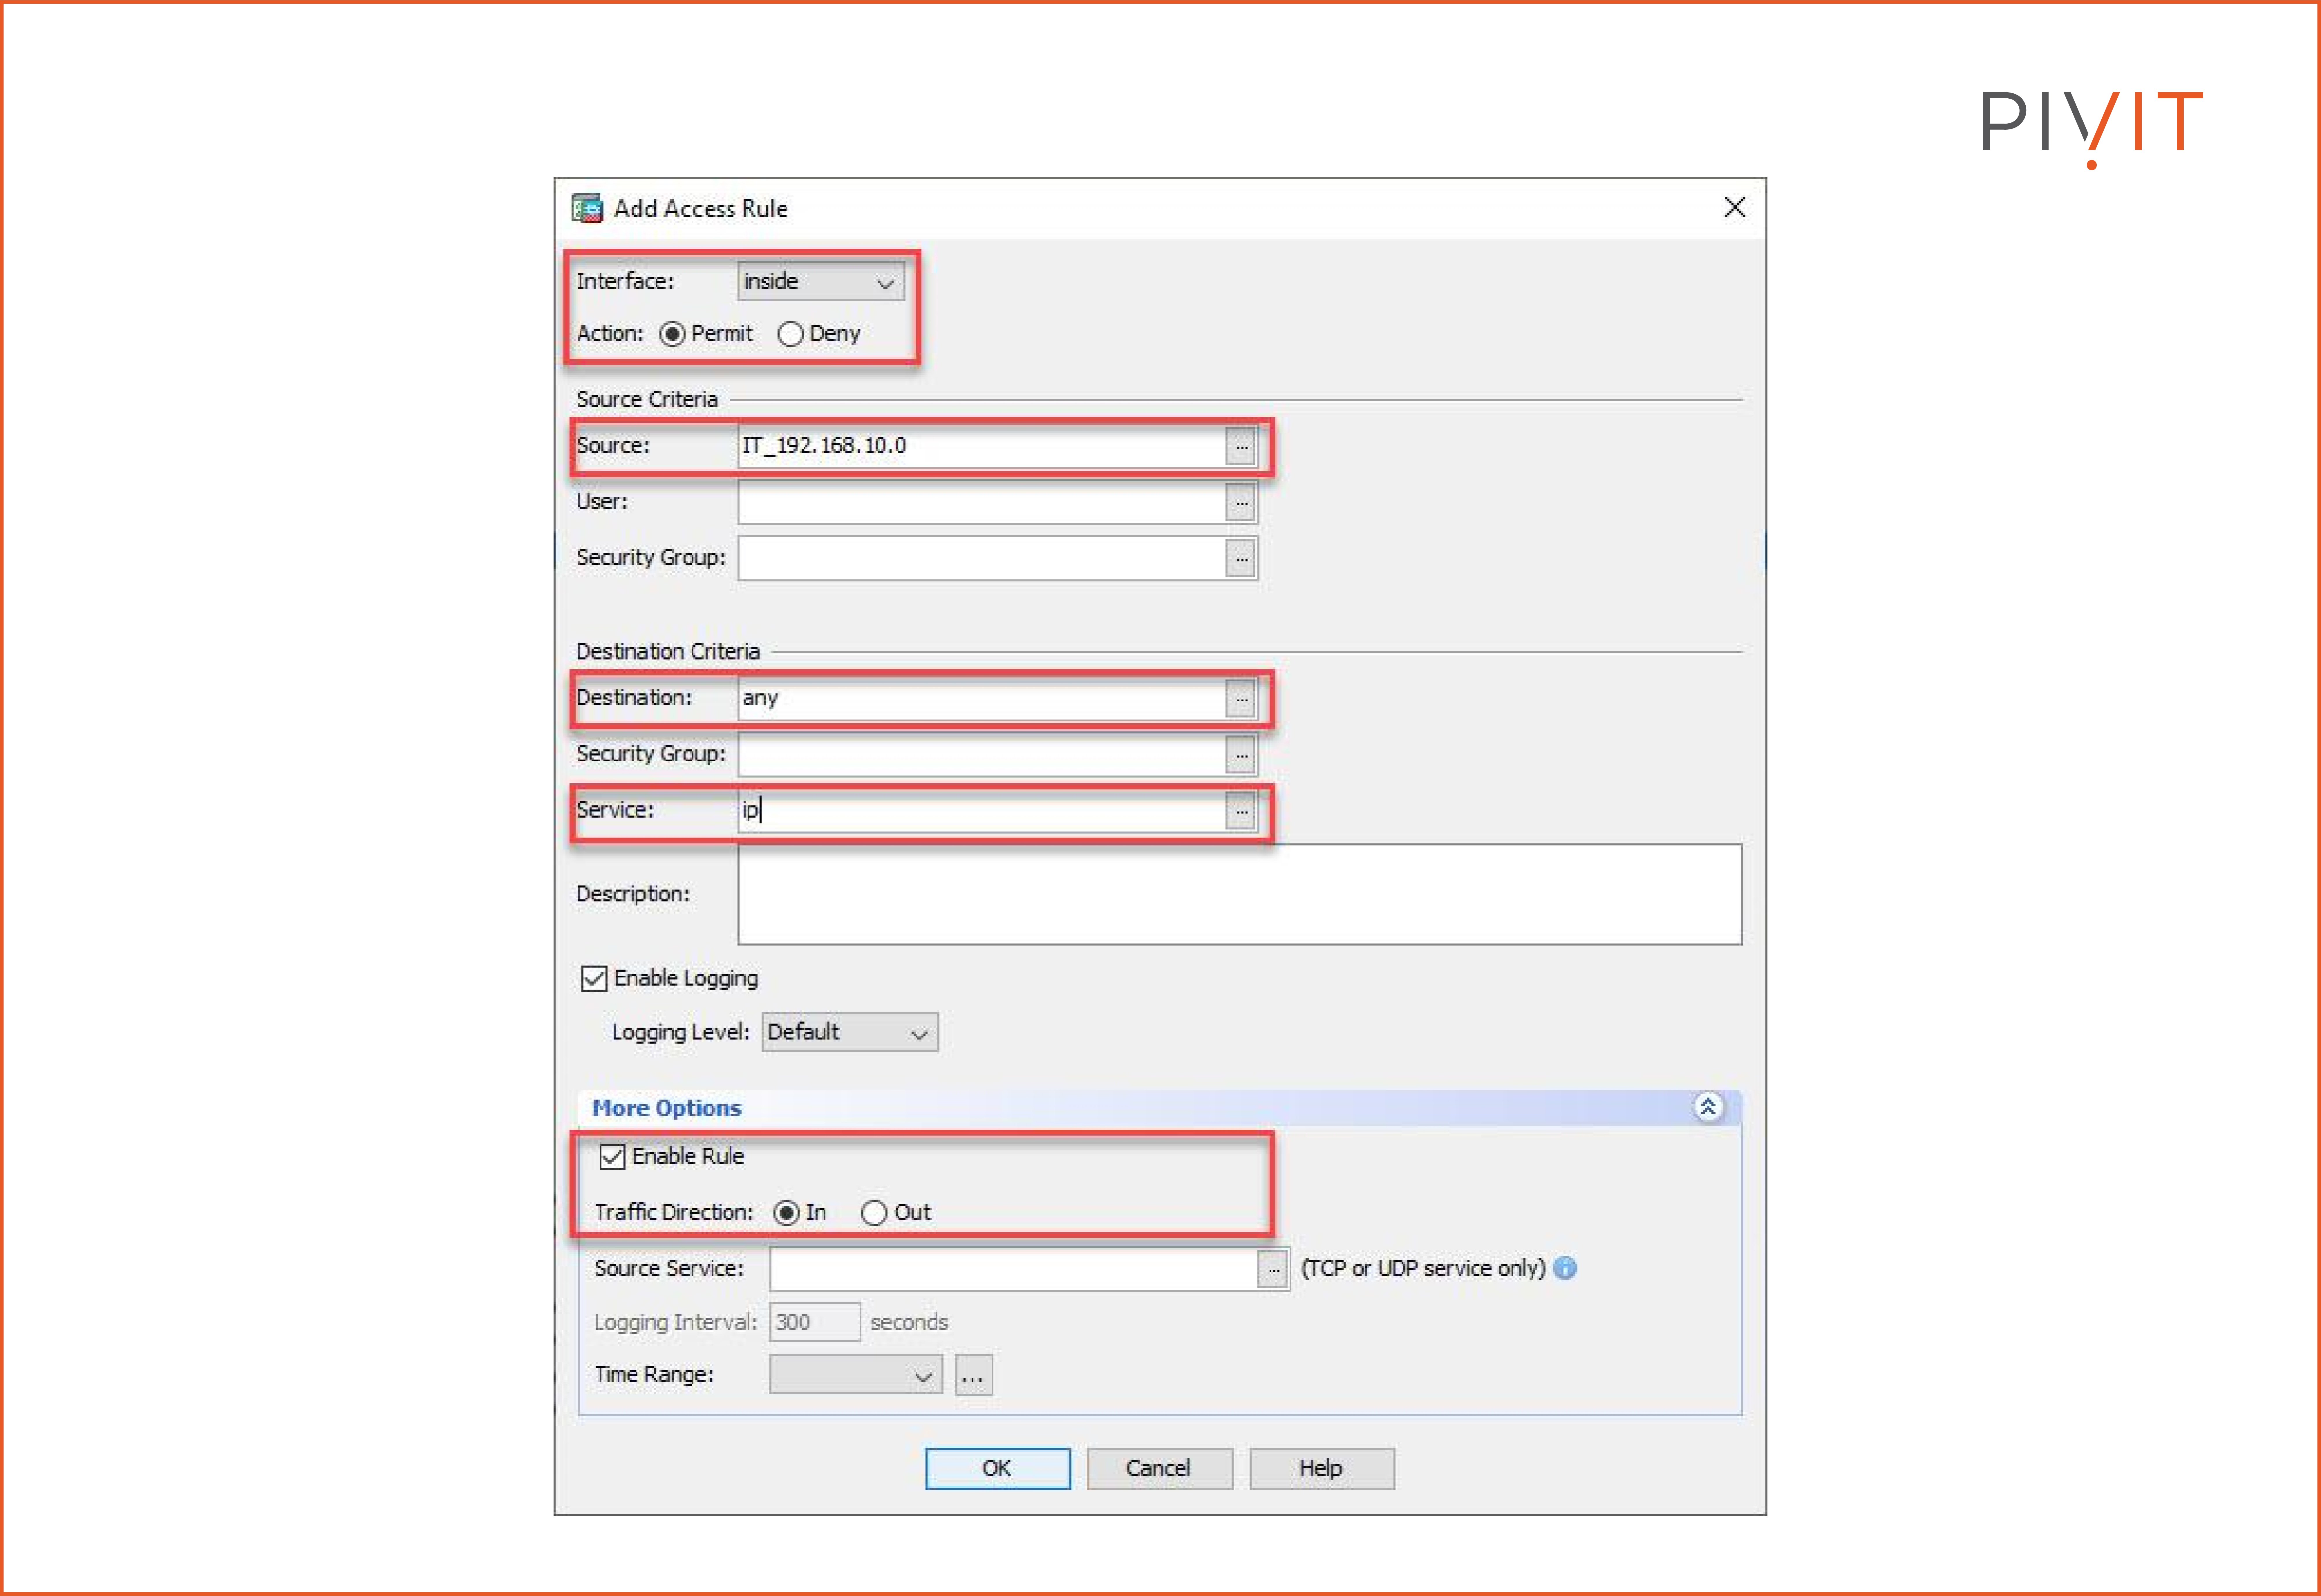 Configuring access rule on the inside interface in an inbound direction to allow any traffic